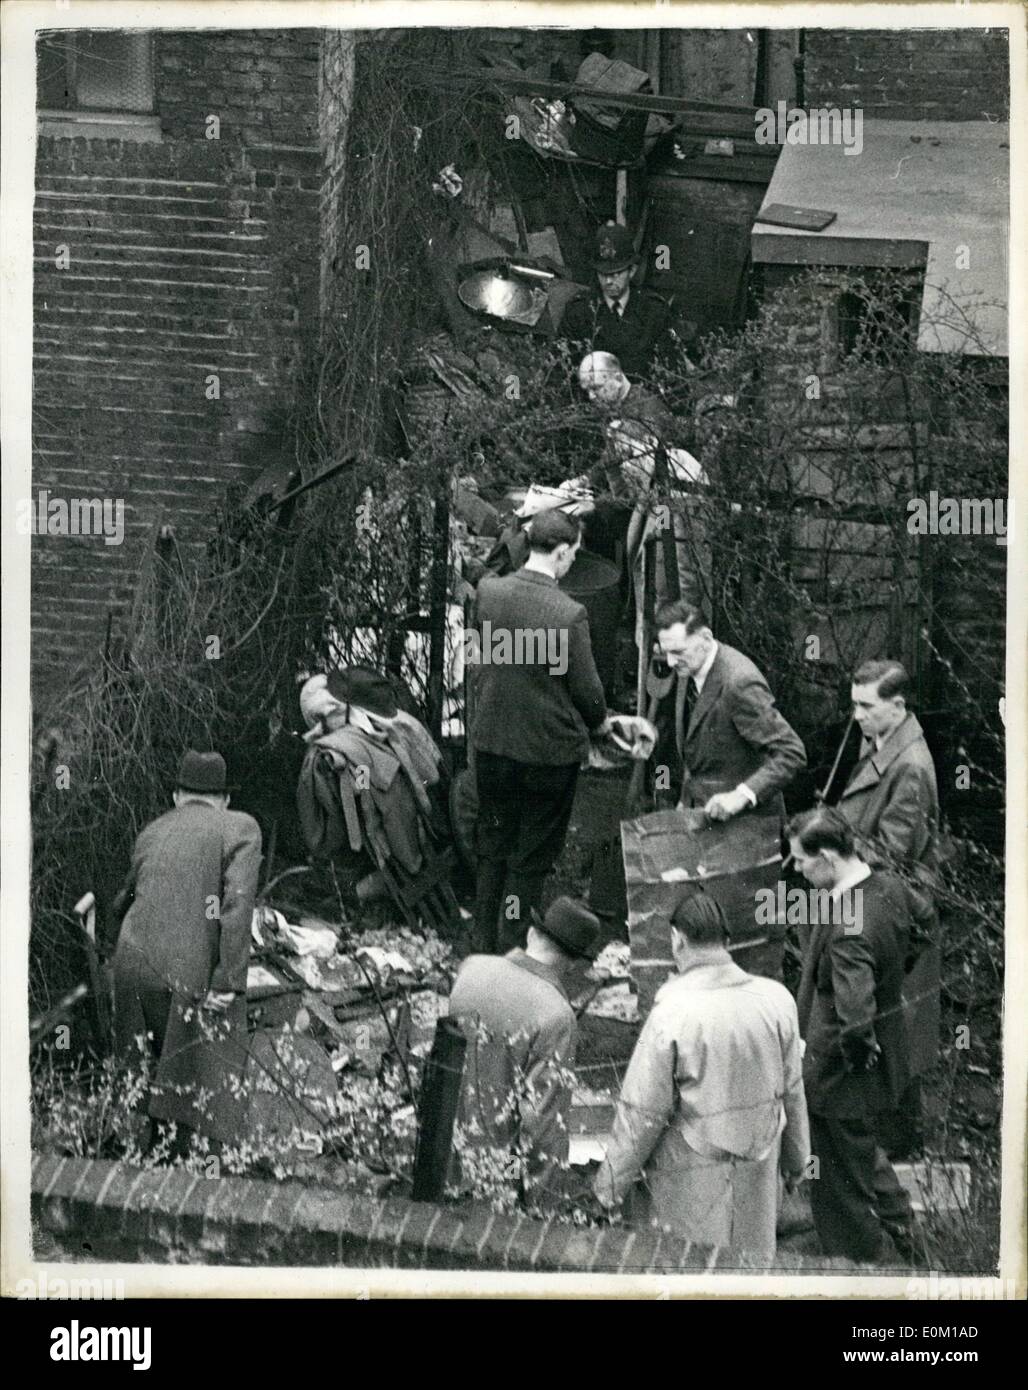 Mar. 03, 1953 - More remains found at house of Death: In a corner of the rubble strewn garden of the Notting Hill murder house today, digging detectives unearthed remains, believed to be human, and possibly those of a fifth victim of the Rillington place strangler. While police in shirt sleeves dug beneath a bush in the brick walled garden they passed bones and pieces of material to Dr. F.E. Camps, the pathologist. Photo shows Police Superintendent Tom Barratt (left) and his men searching the garden today. Holding cardboard is Chief - Inspection P. Law Stock Photo